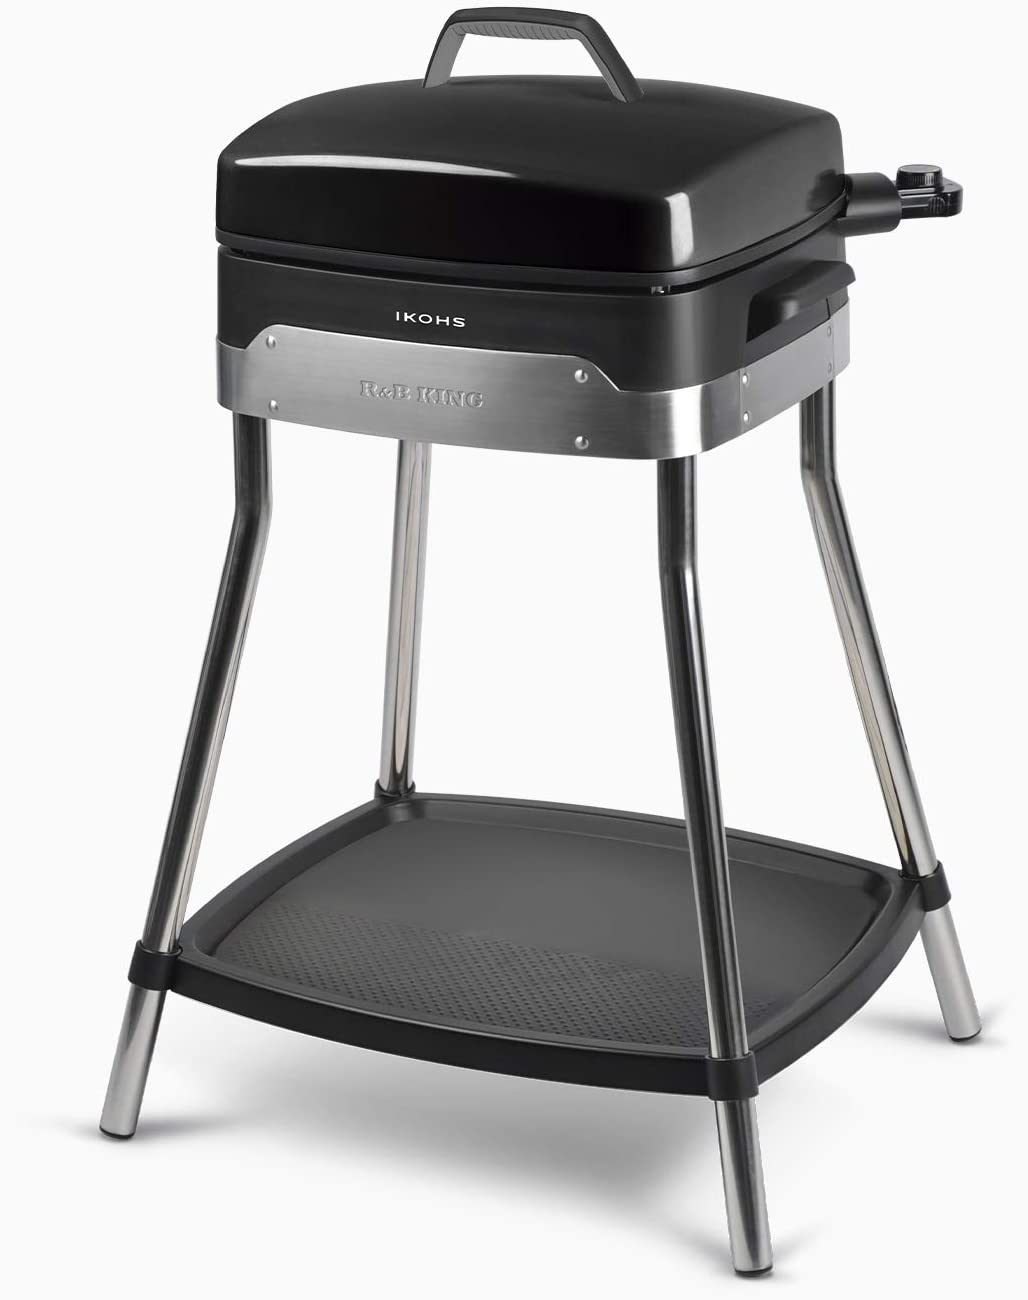 Ikohs R&B King electric grill for outdoor use, with stainless steel legs, 2000 W, thermostat in 5 power levels, grill plate with 3 surfaces, easy to clean, 38.1 x 43.1 x 82 cm